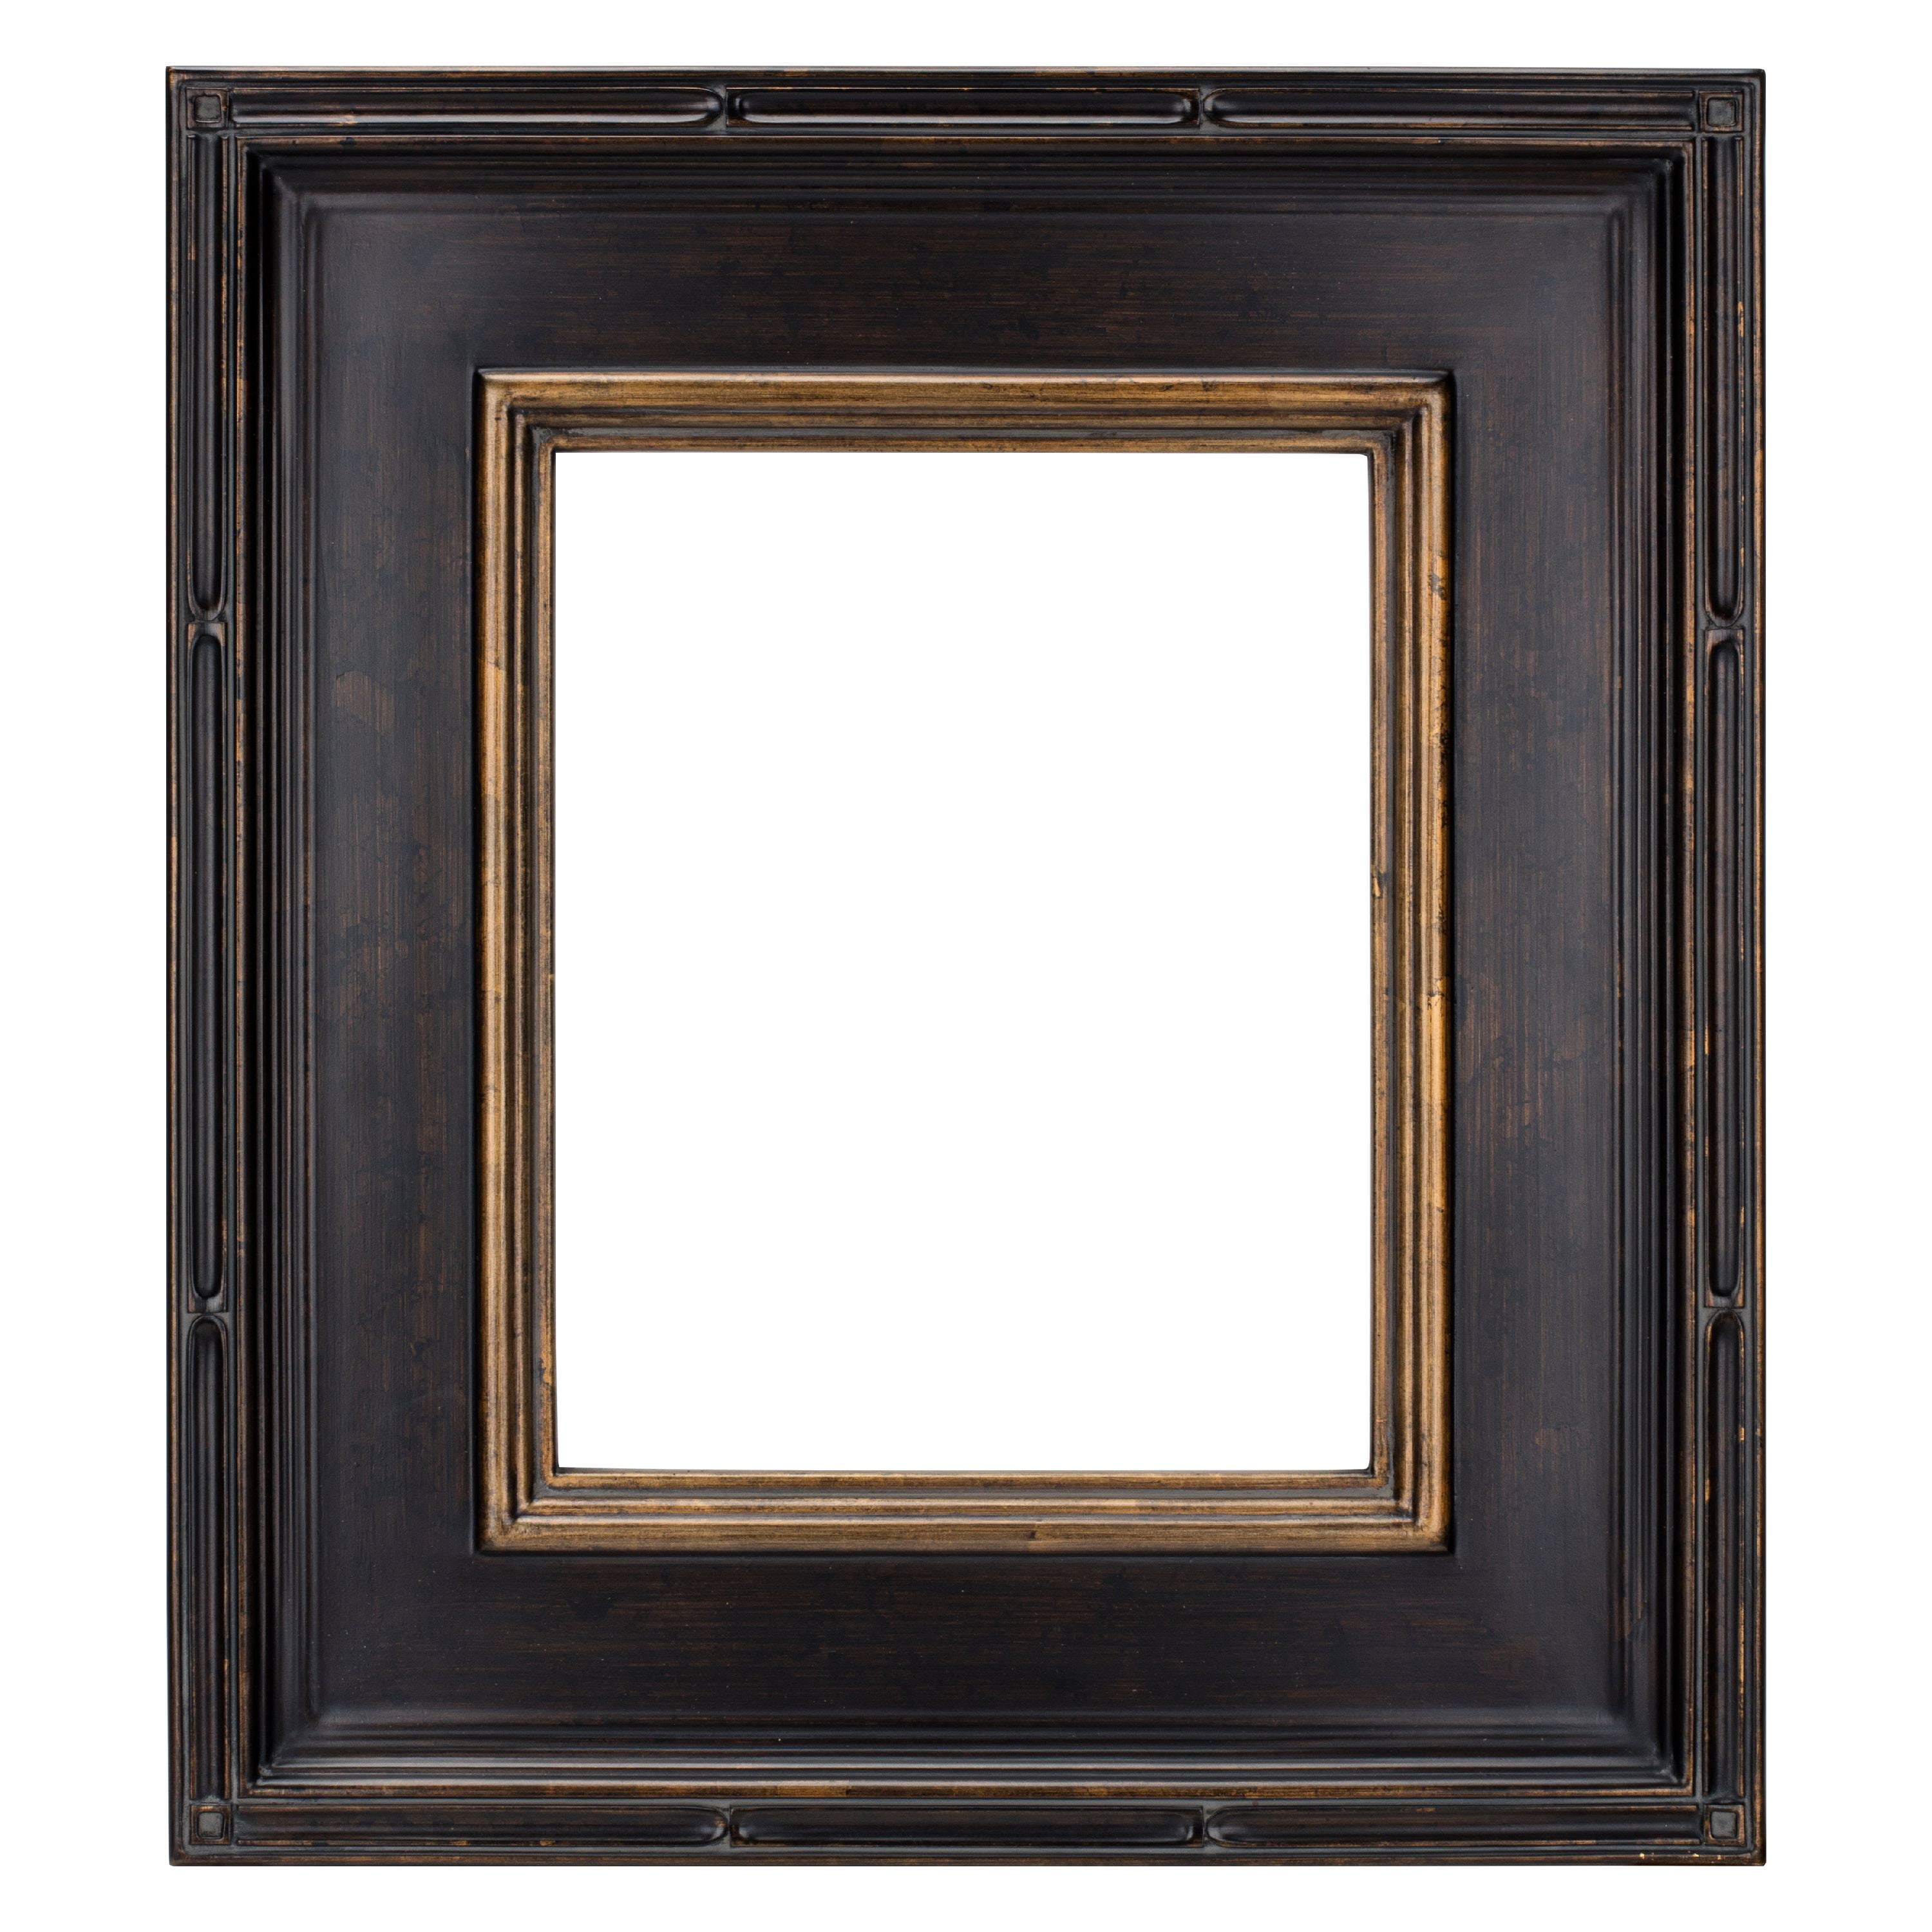 Creative Mark Museum Collection Plein Aire Frames Museum Quality Plein  Aire Frames for Photos, Artwork, Paintings,  More! Black  Gold 16x20 